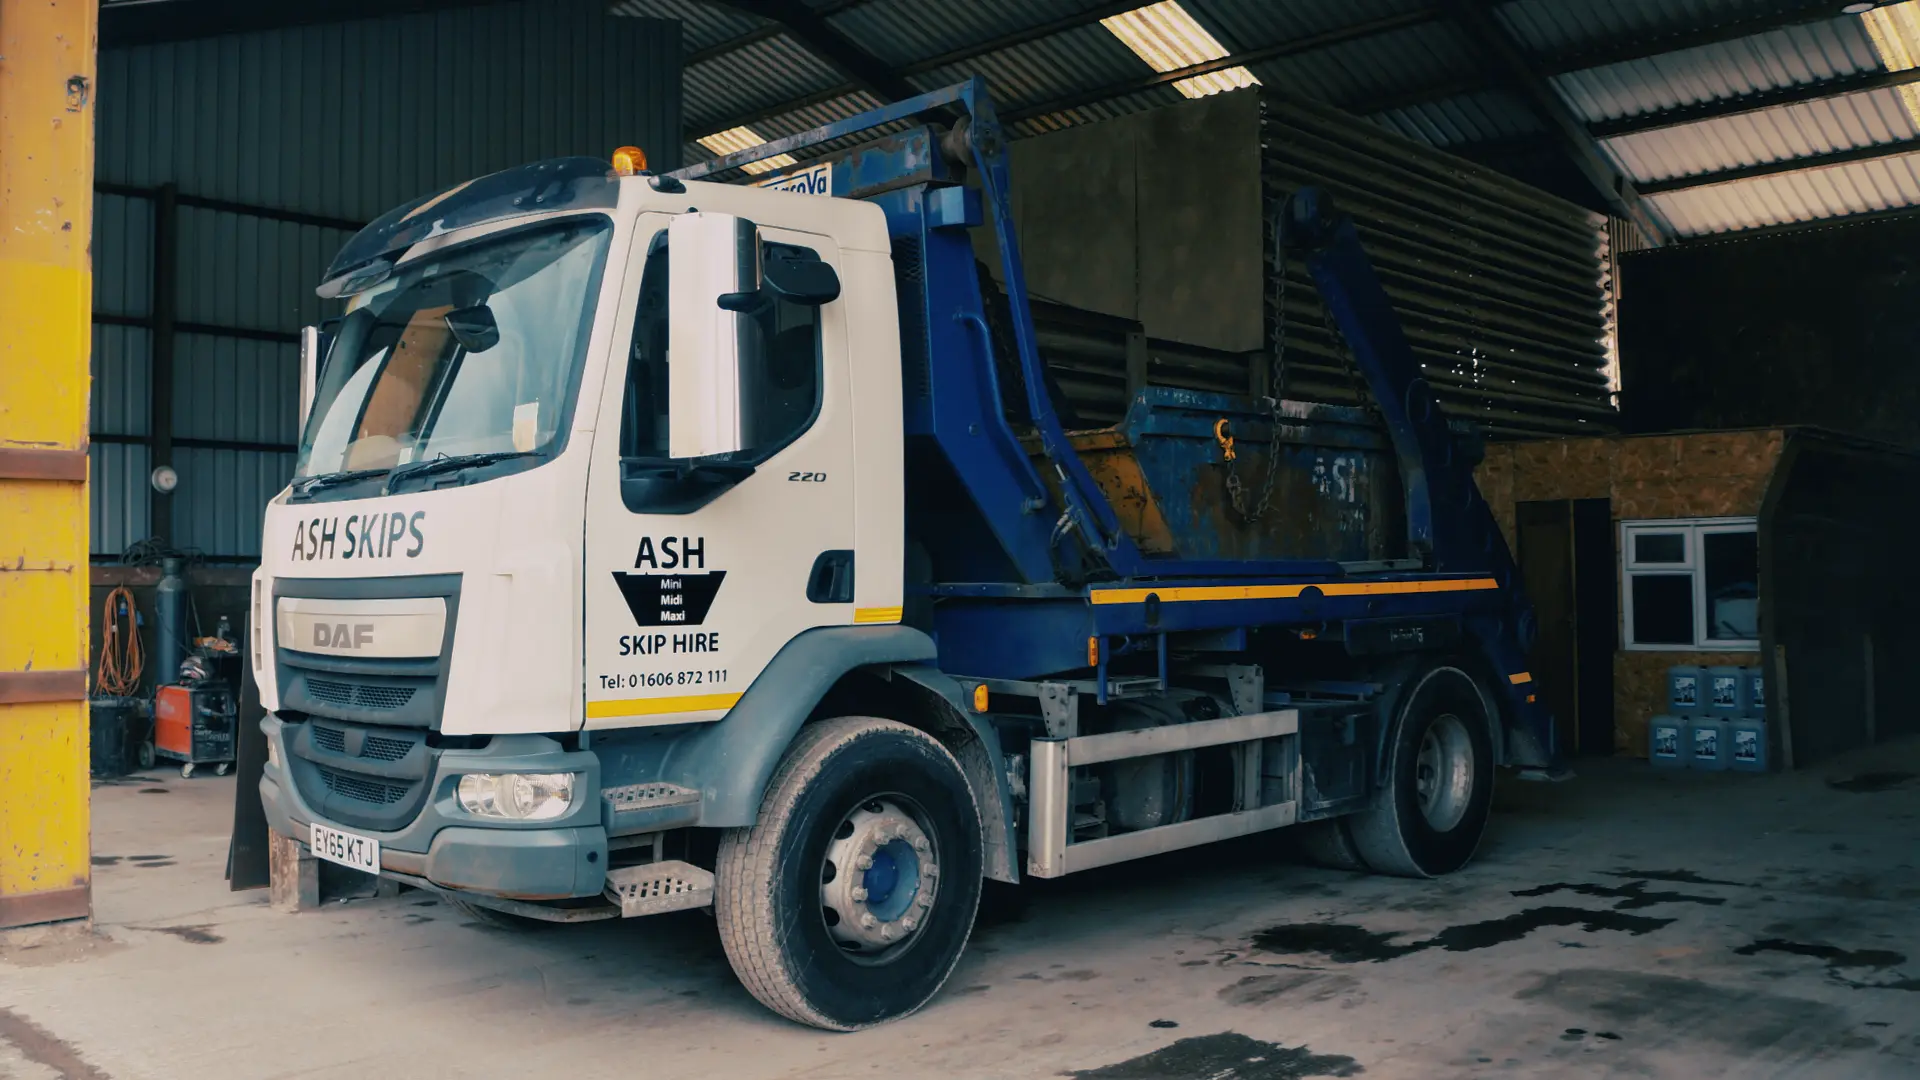 Truck loaded with a skip at Ash Skip Hire in Northwich, showcasing their waste management services with a fully loaded vehicle.